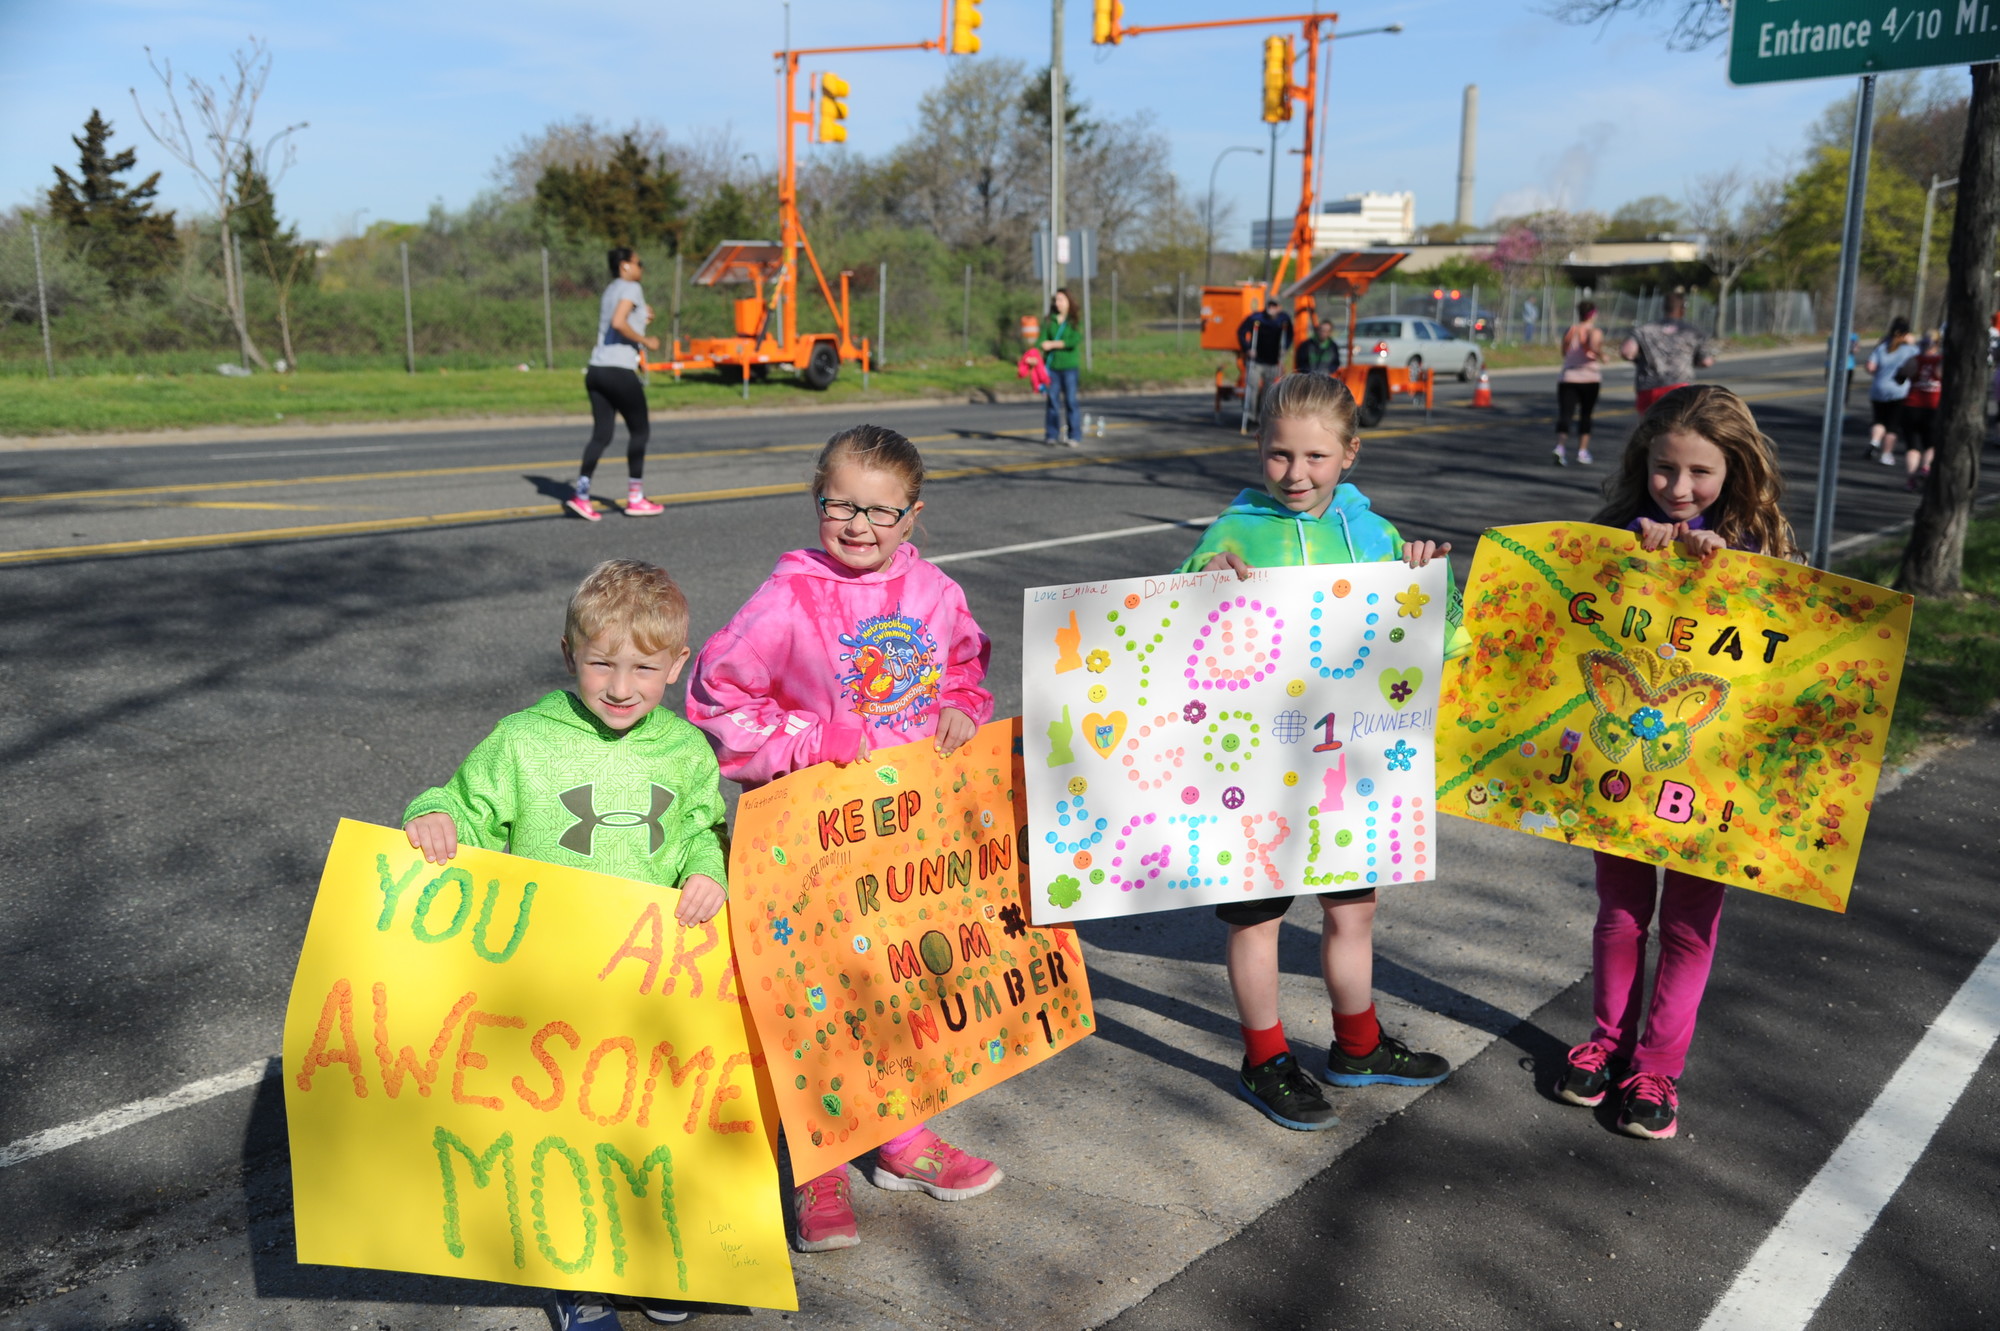 Christopher Reslaff, 4, at left, Claudia, 6, Emilia, 9, and Katie Malcomson, 8, cheered on their mom and aunt.